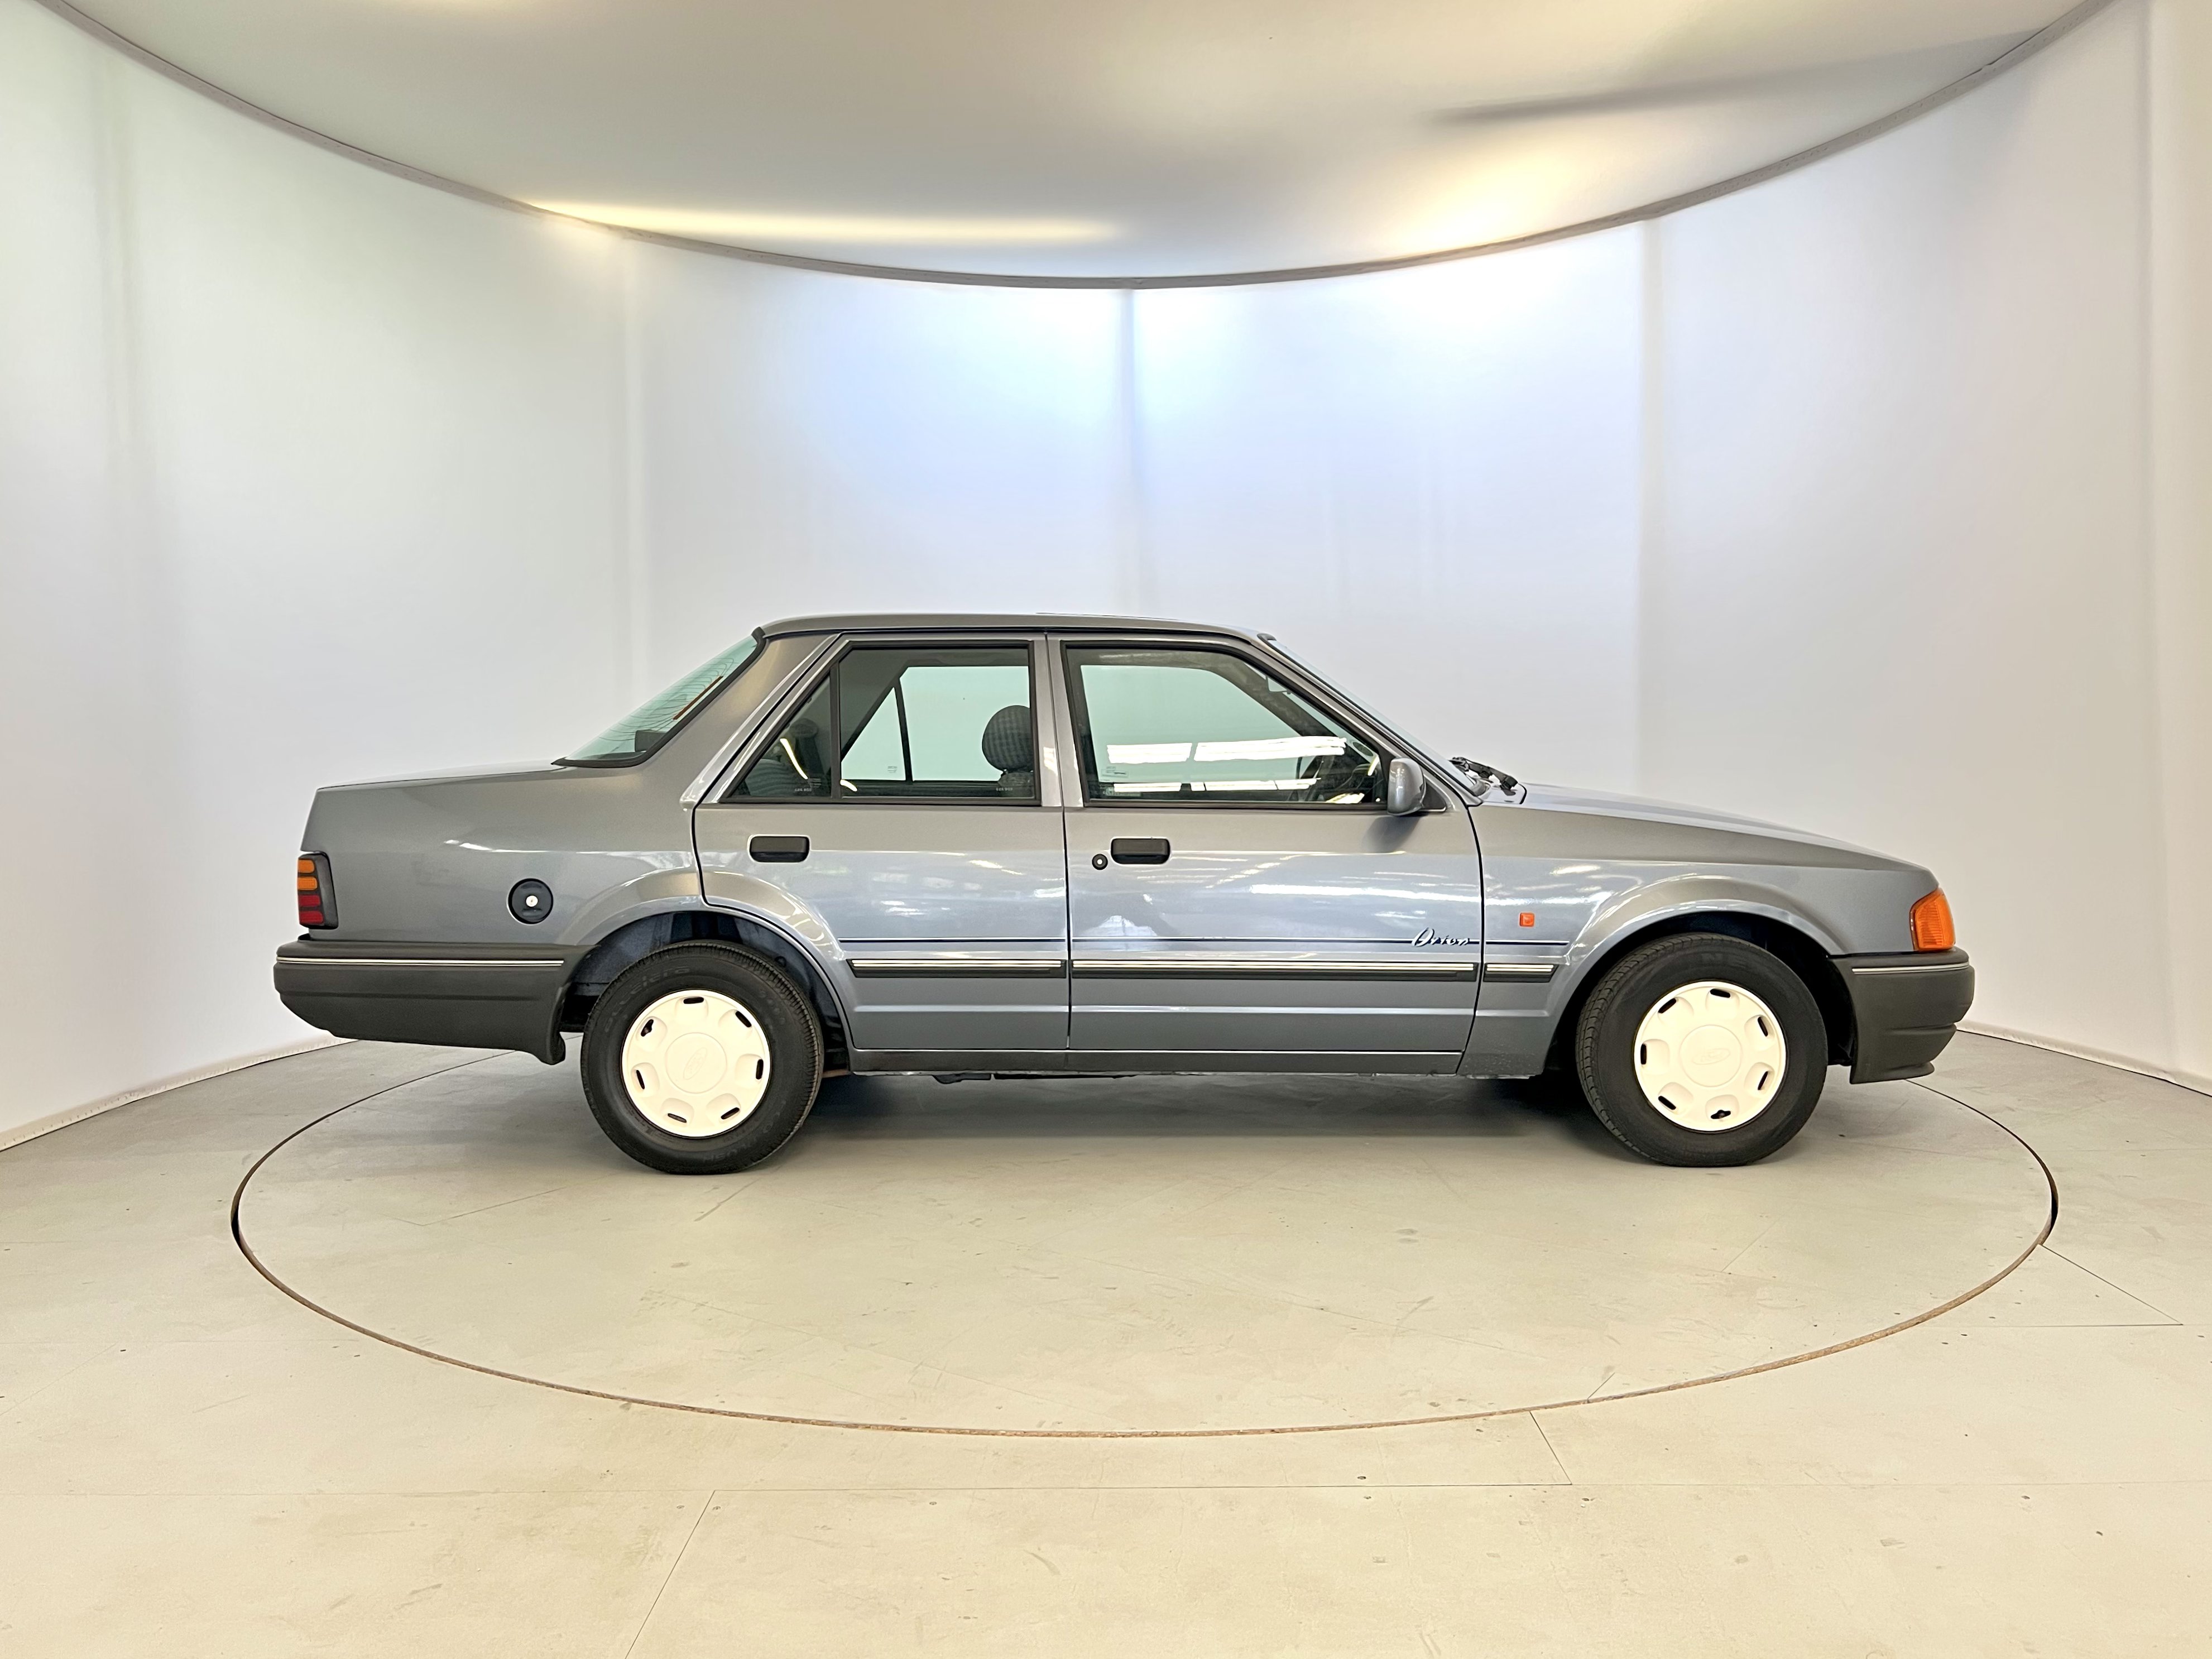 Ford Orion DX - Image 11 of 34